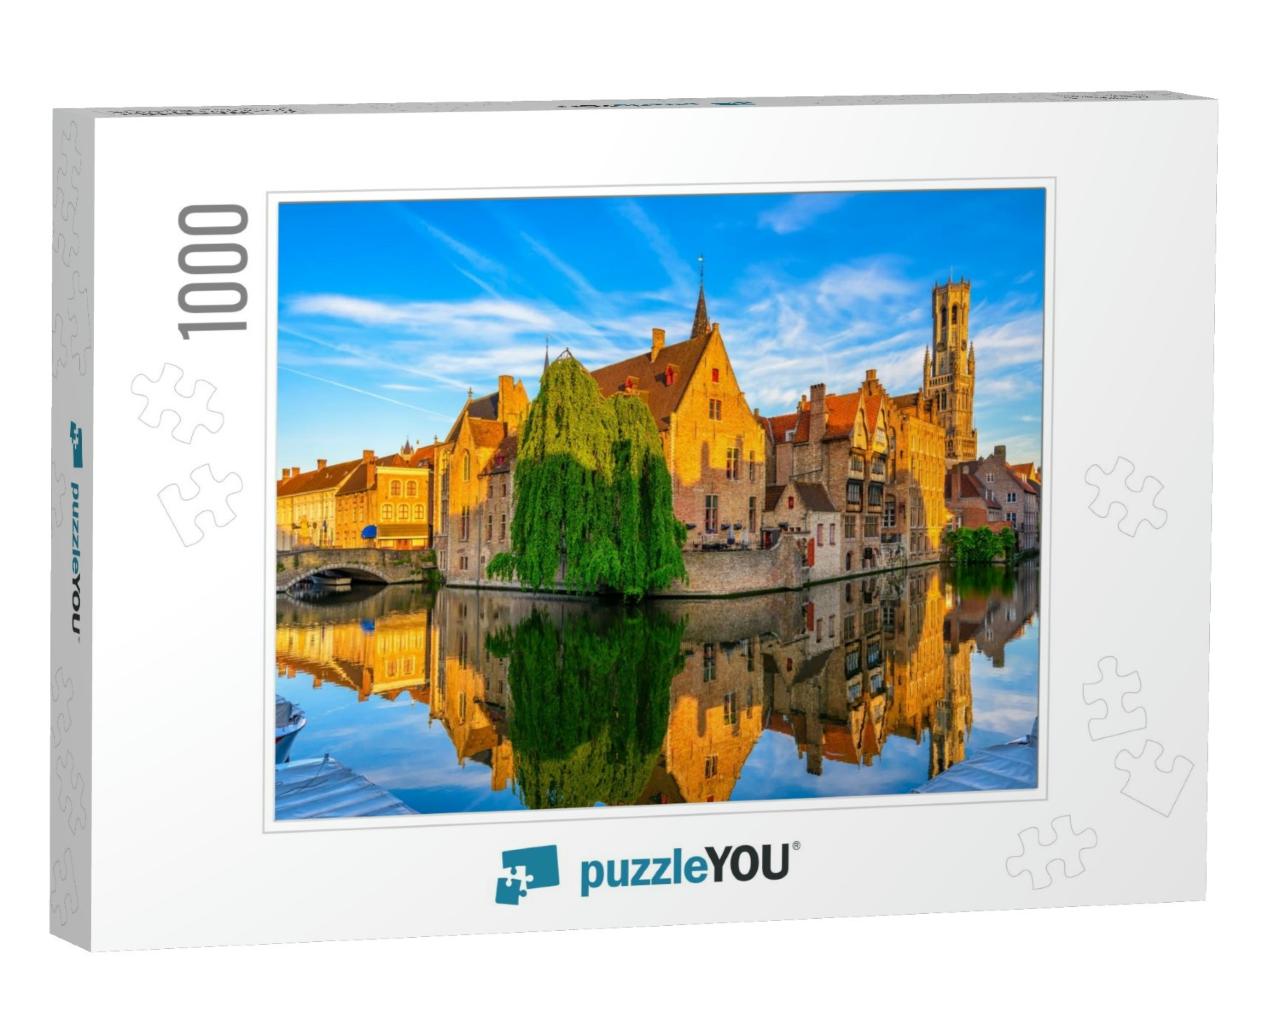 Classic View of the Historic City Center of Bruges Brugge... Jigsaw Puzzle with 1000 pieces